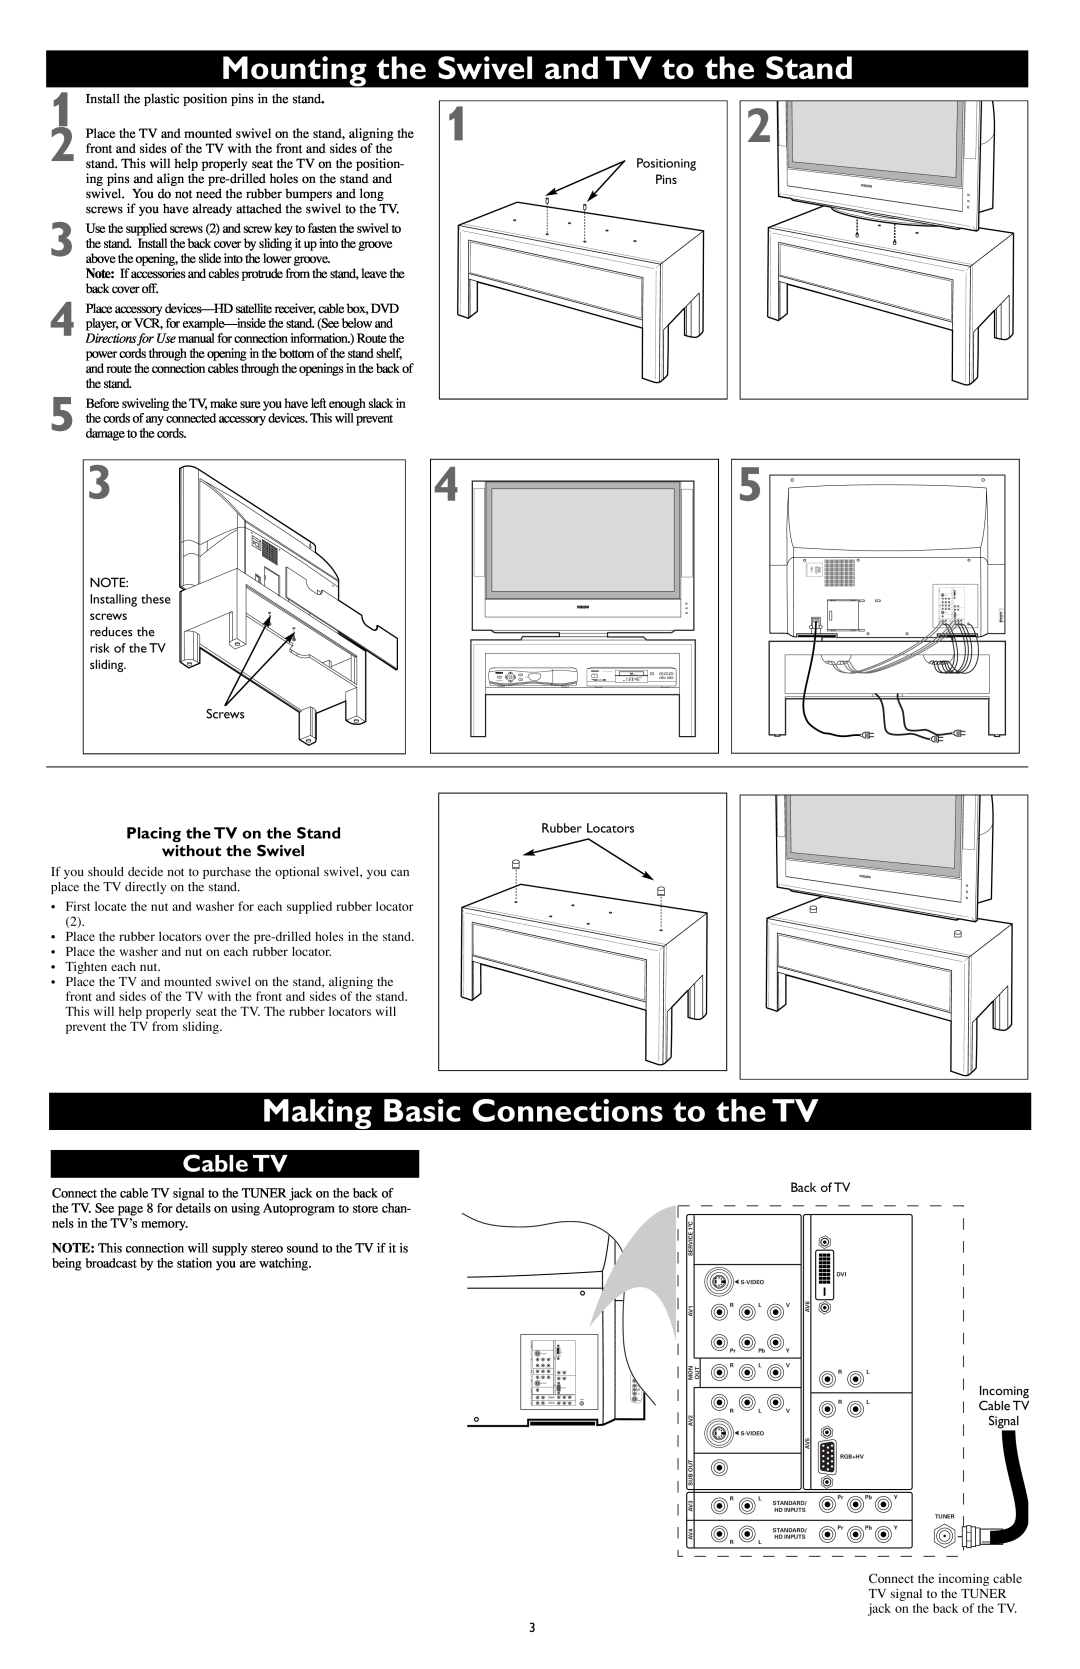 Philips CD-D11U, CD-D13, CD-D17HD Mounting the Swivel and TV to the Stand, Making Basic Connections to the TV, Cable TV 